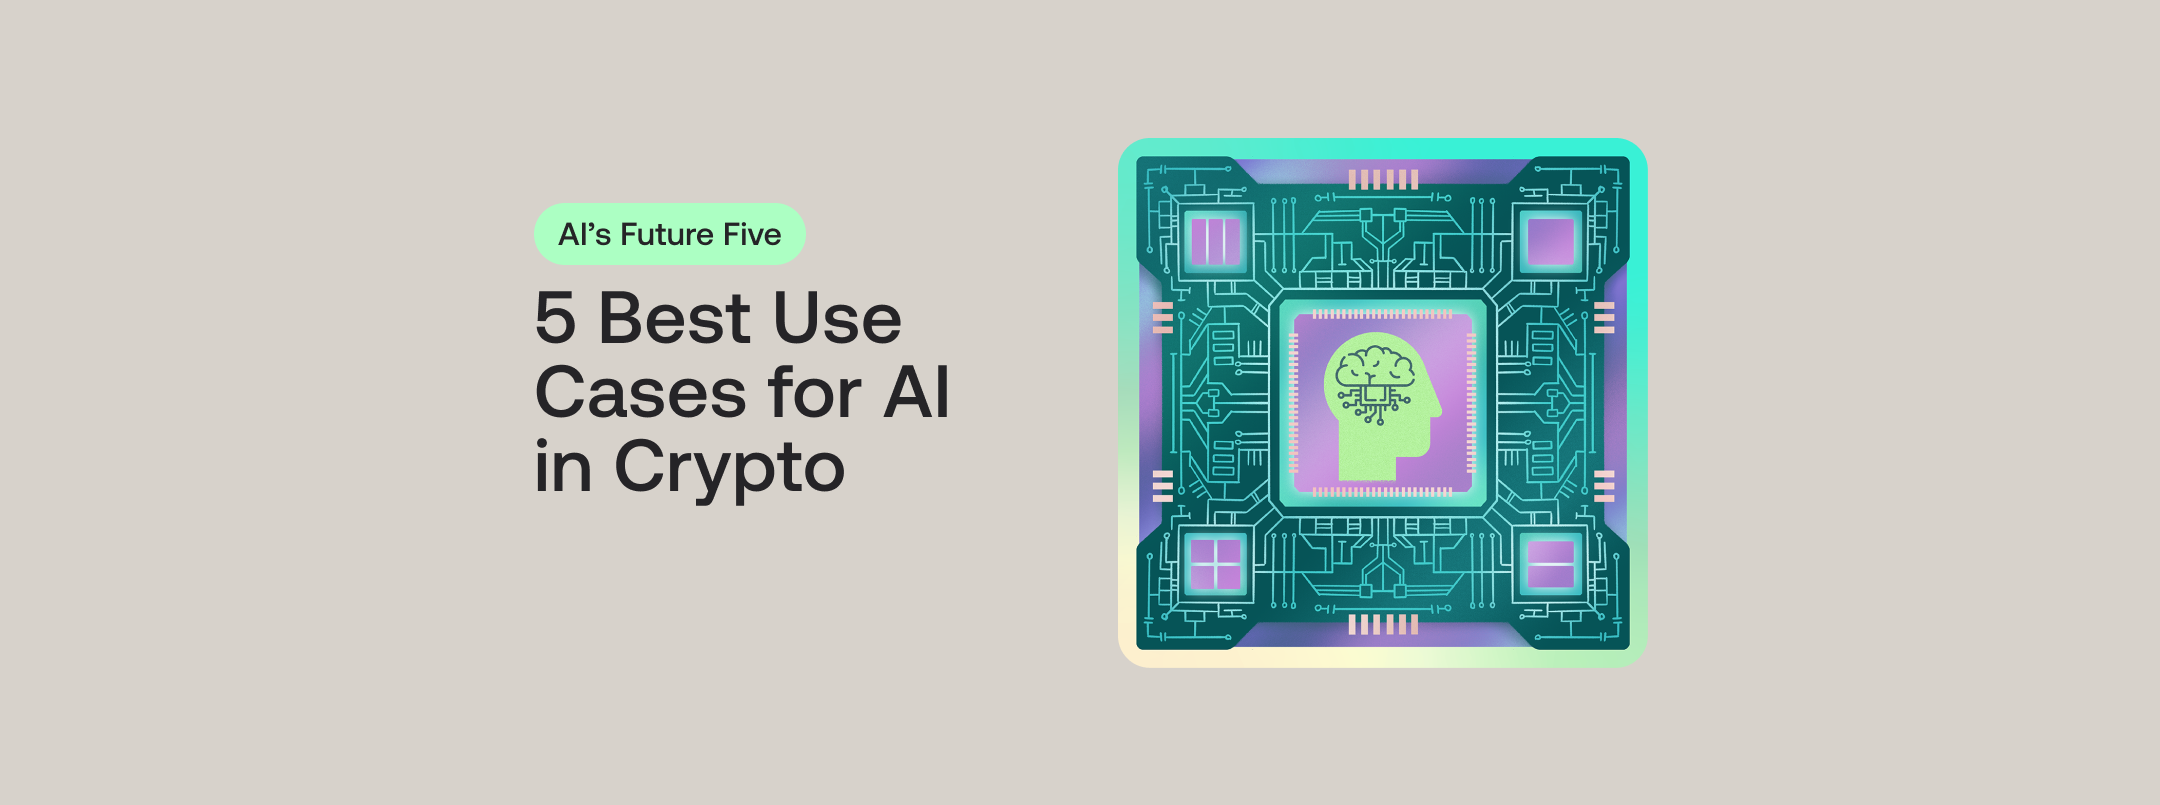 5 Best Use Cases for AI in Crypto